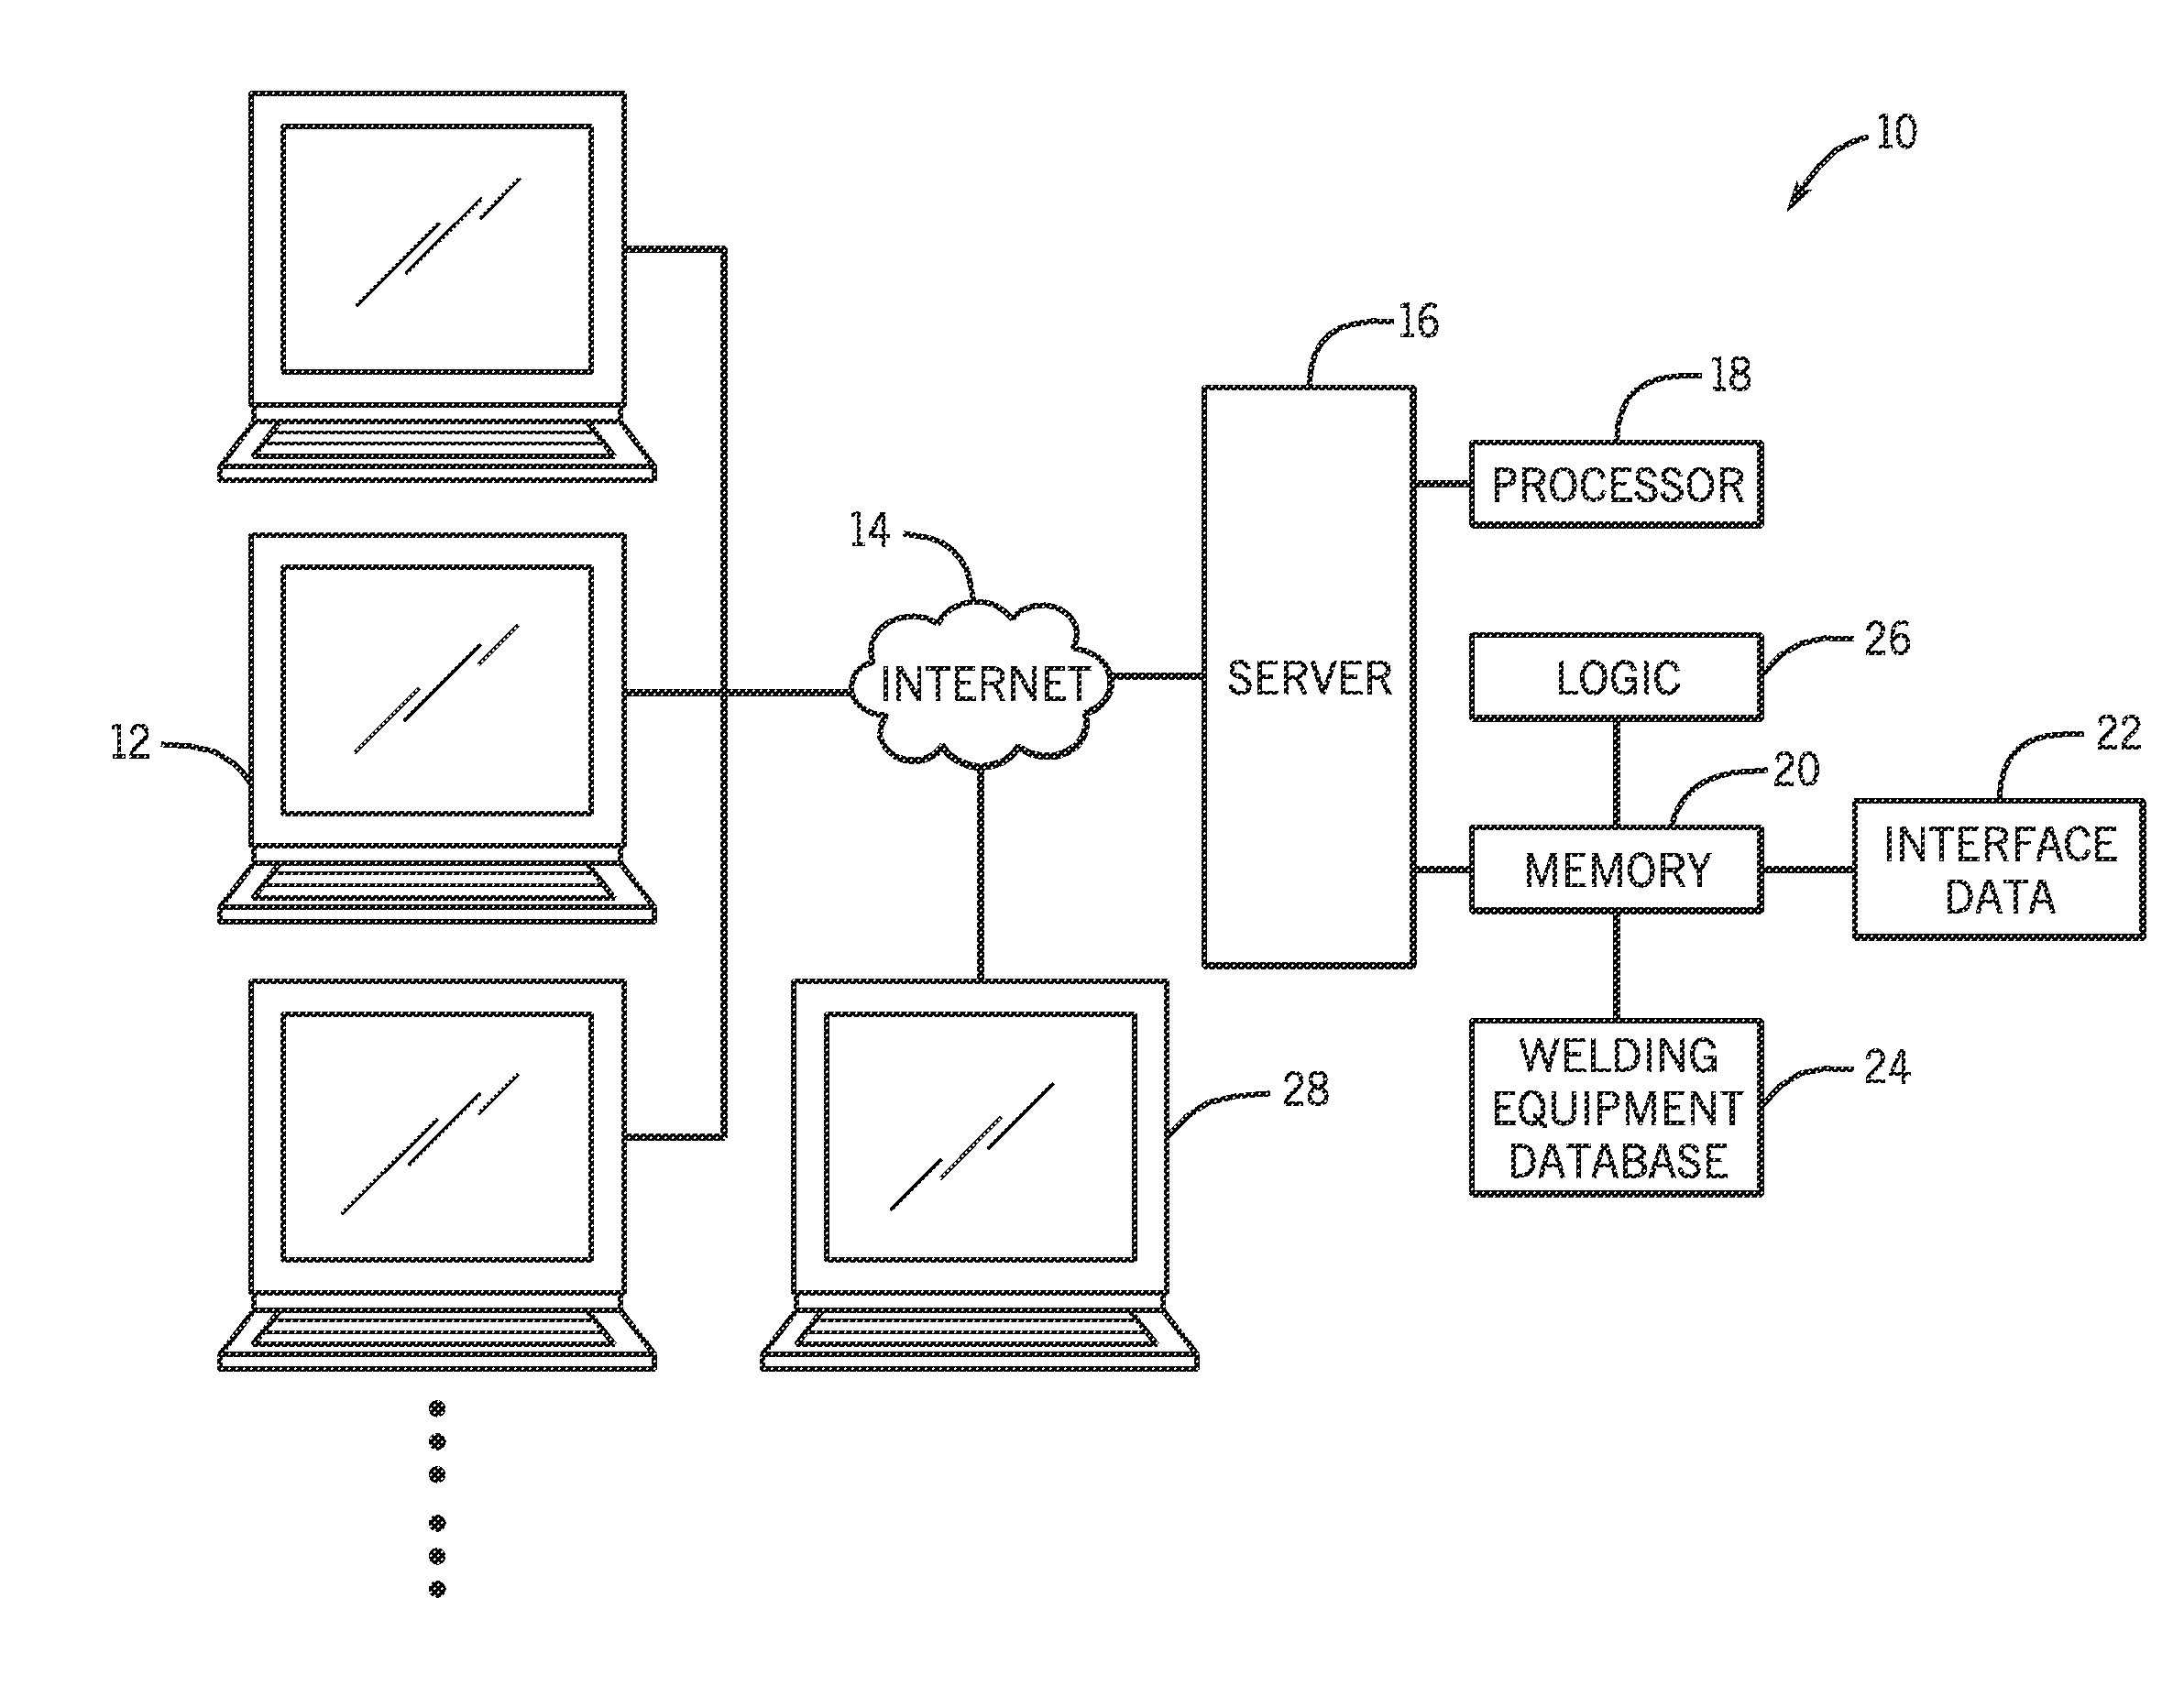 Web configuration system for customizing welding systems